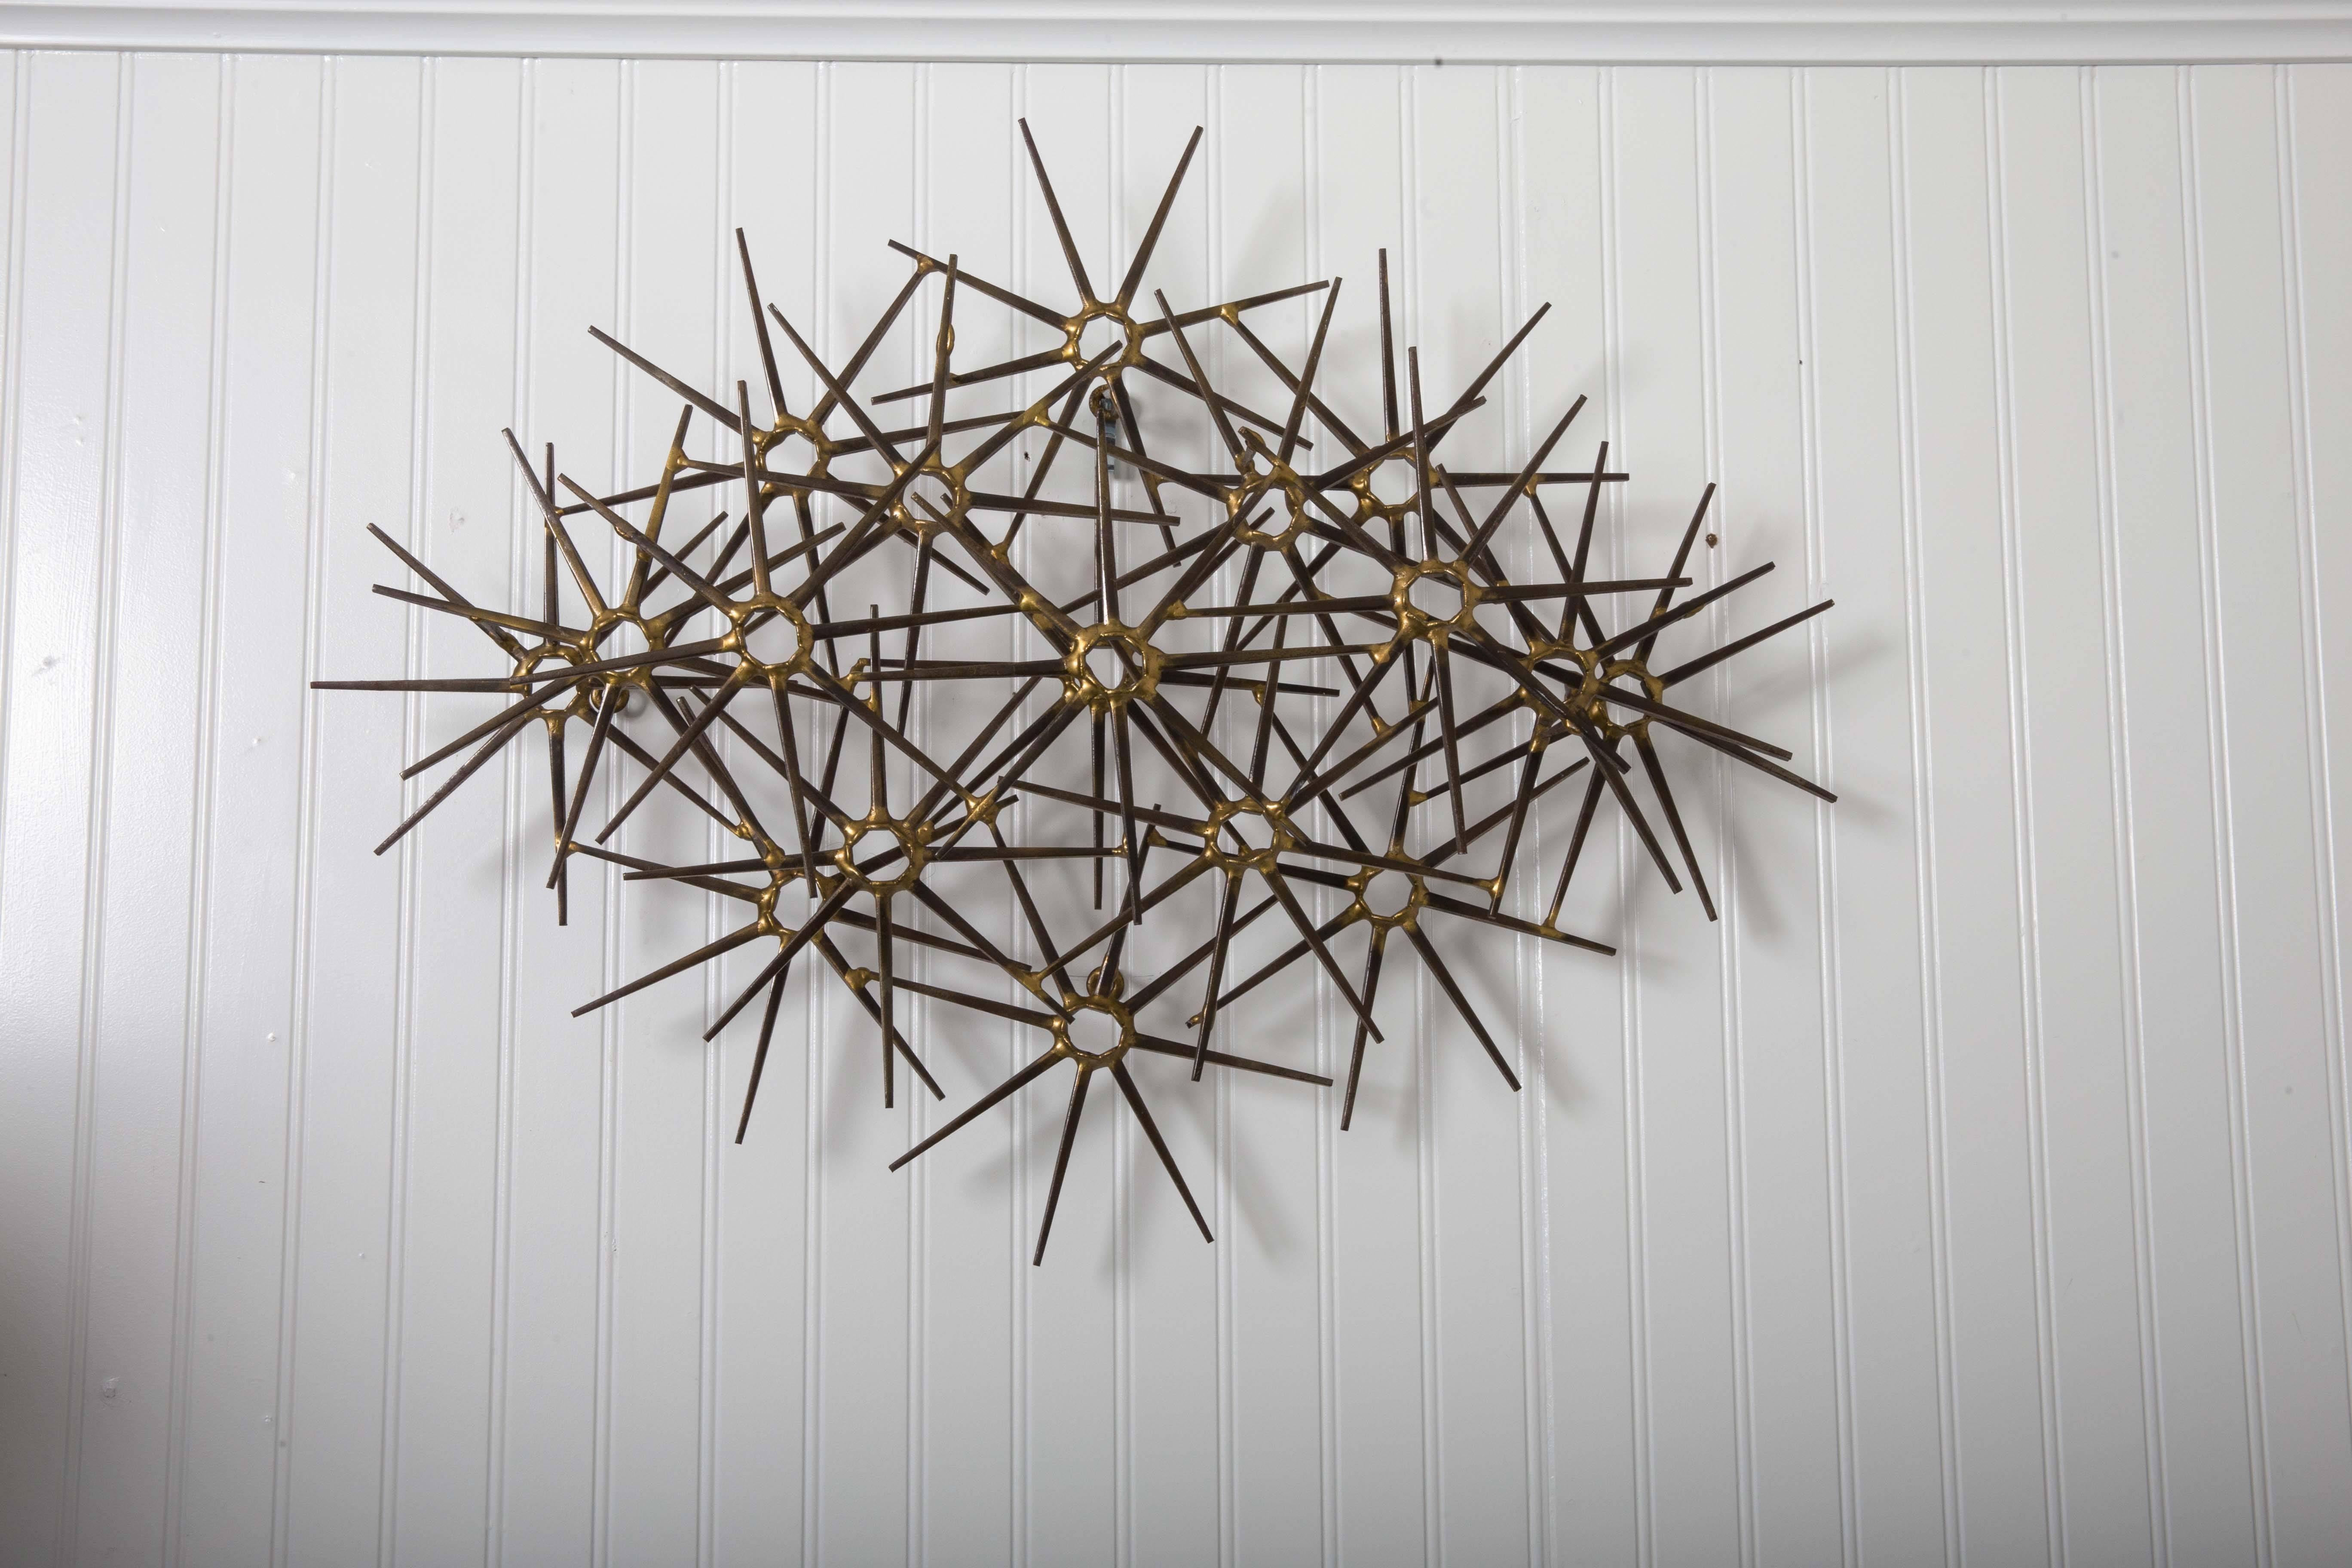 Decorative artist's wall mounted sculpture, circa 1940s-50s. Made of steel and brass.
